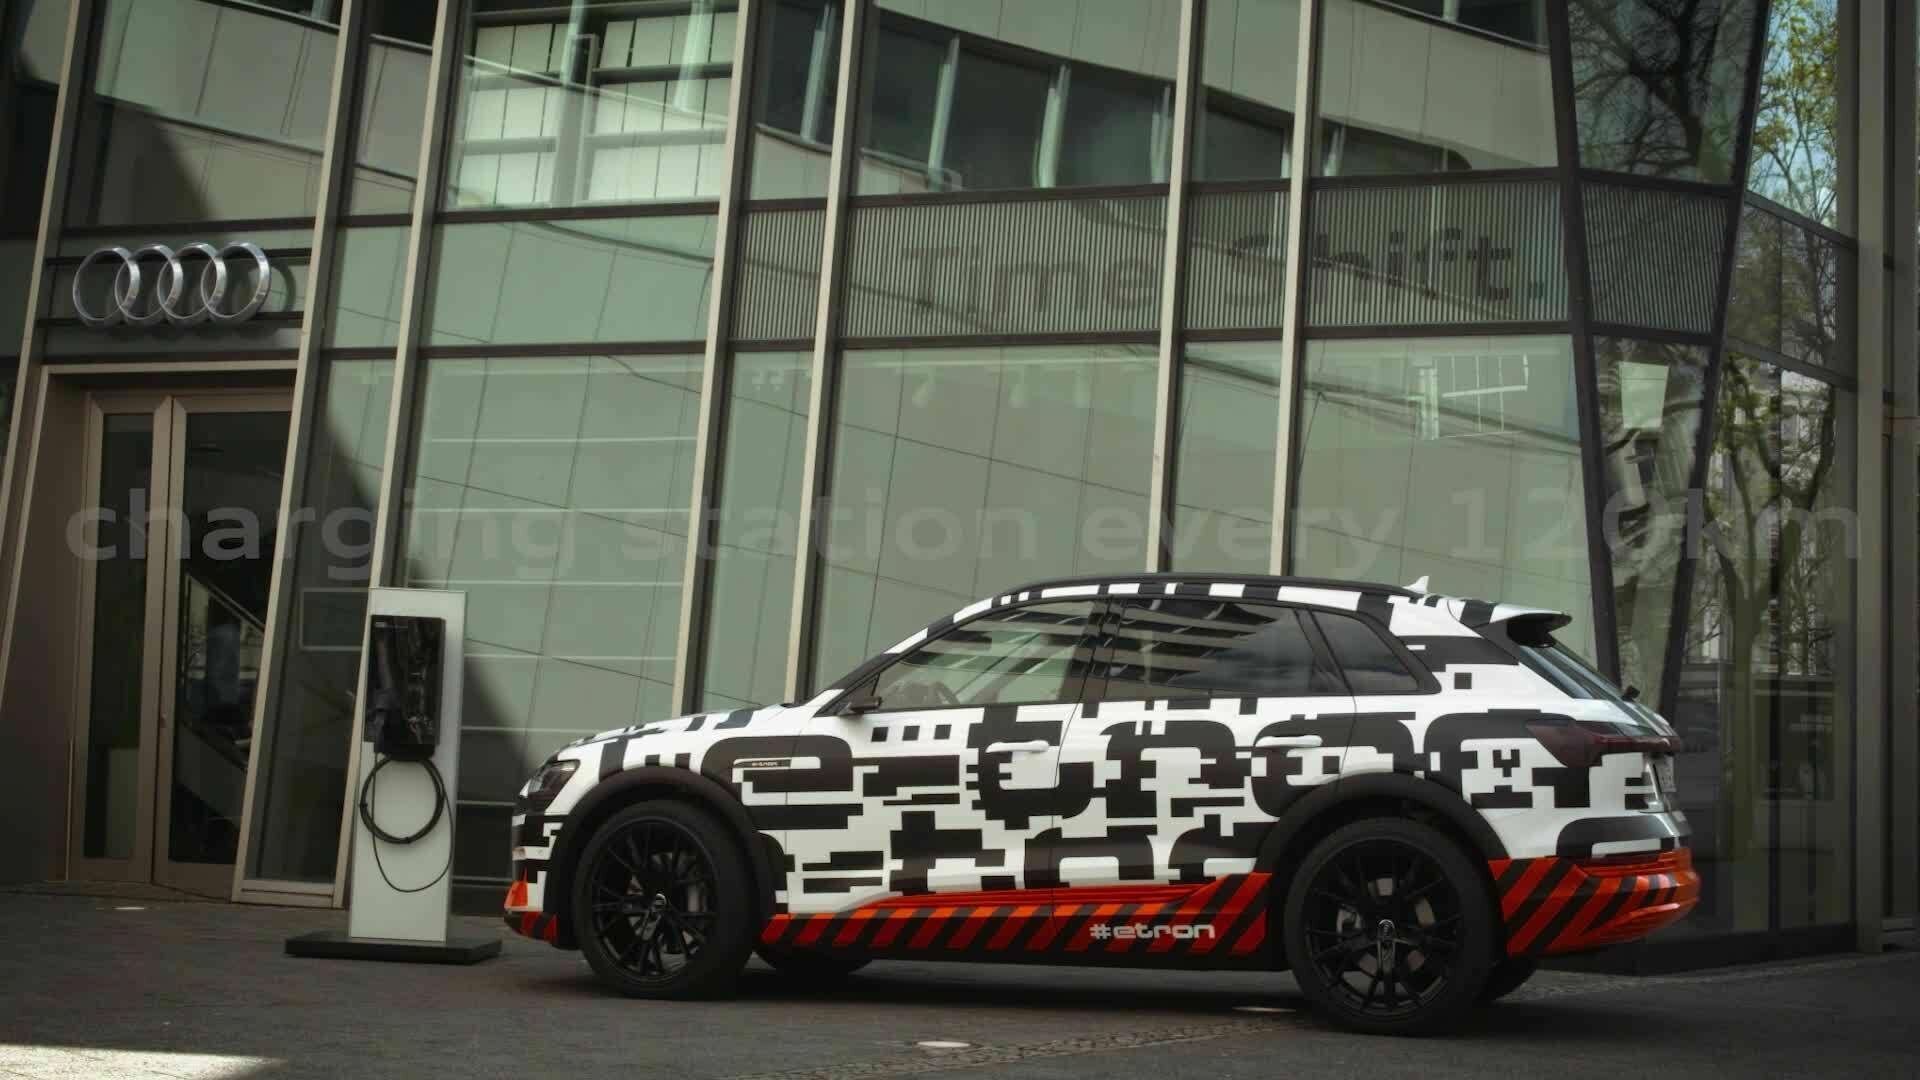 Audi e-tron prototype: Fully charged in nearly 30 minutes